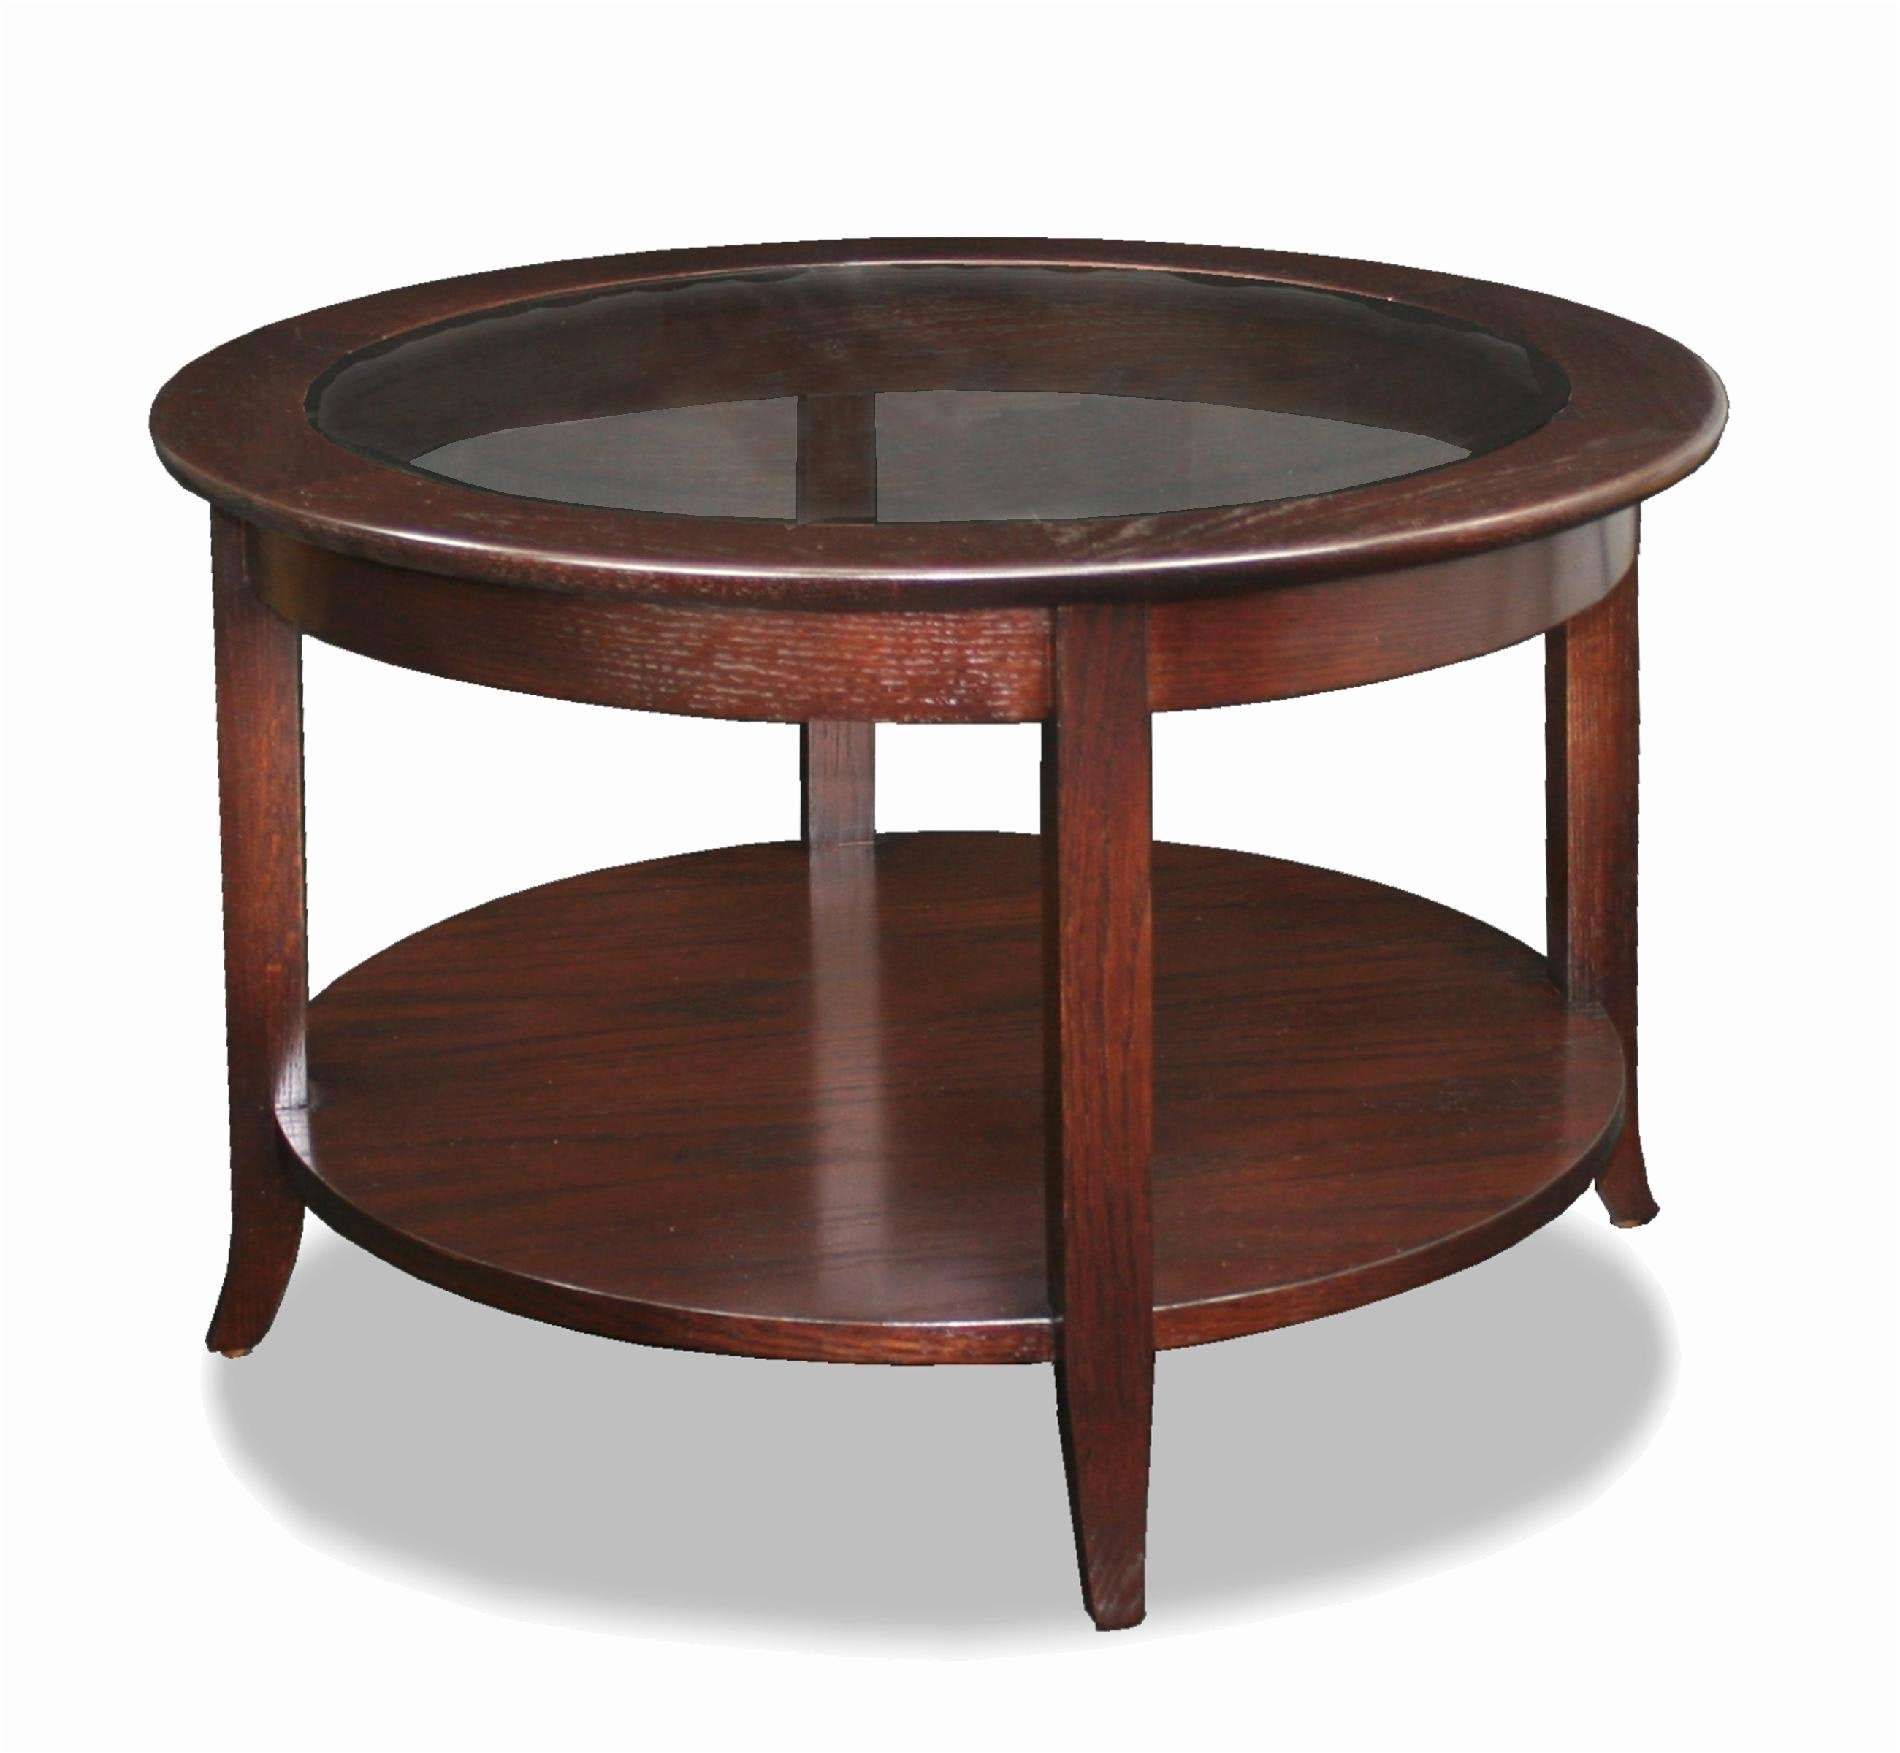 Coffee Table : Marvelous Stone Coffee Table Modern Round Coffee Intended For Well Known Wooden And Glass Coffee Tables (View 17 of 20)